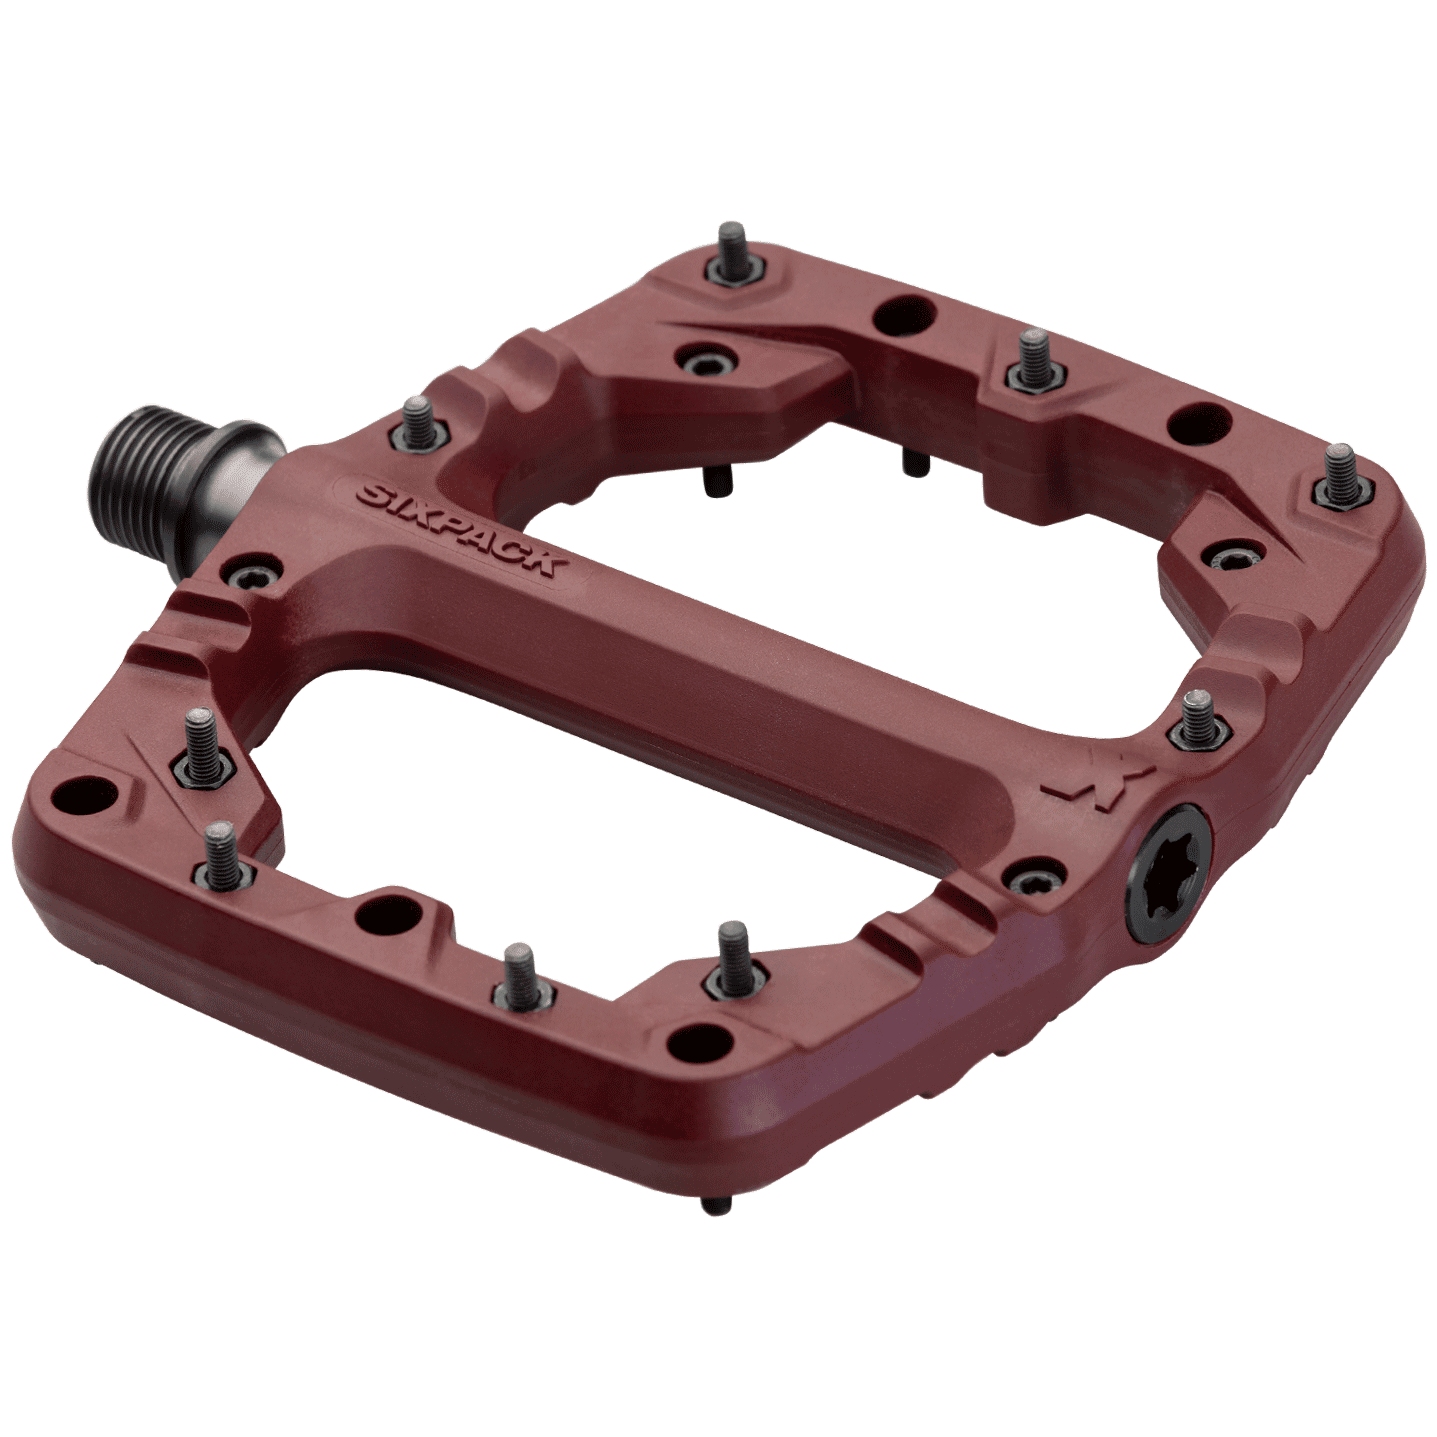 Picture of Sixpack Kamikaze PA Flat Pedals - red velvet